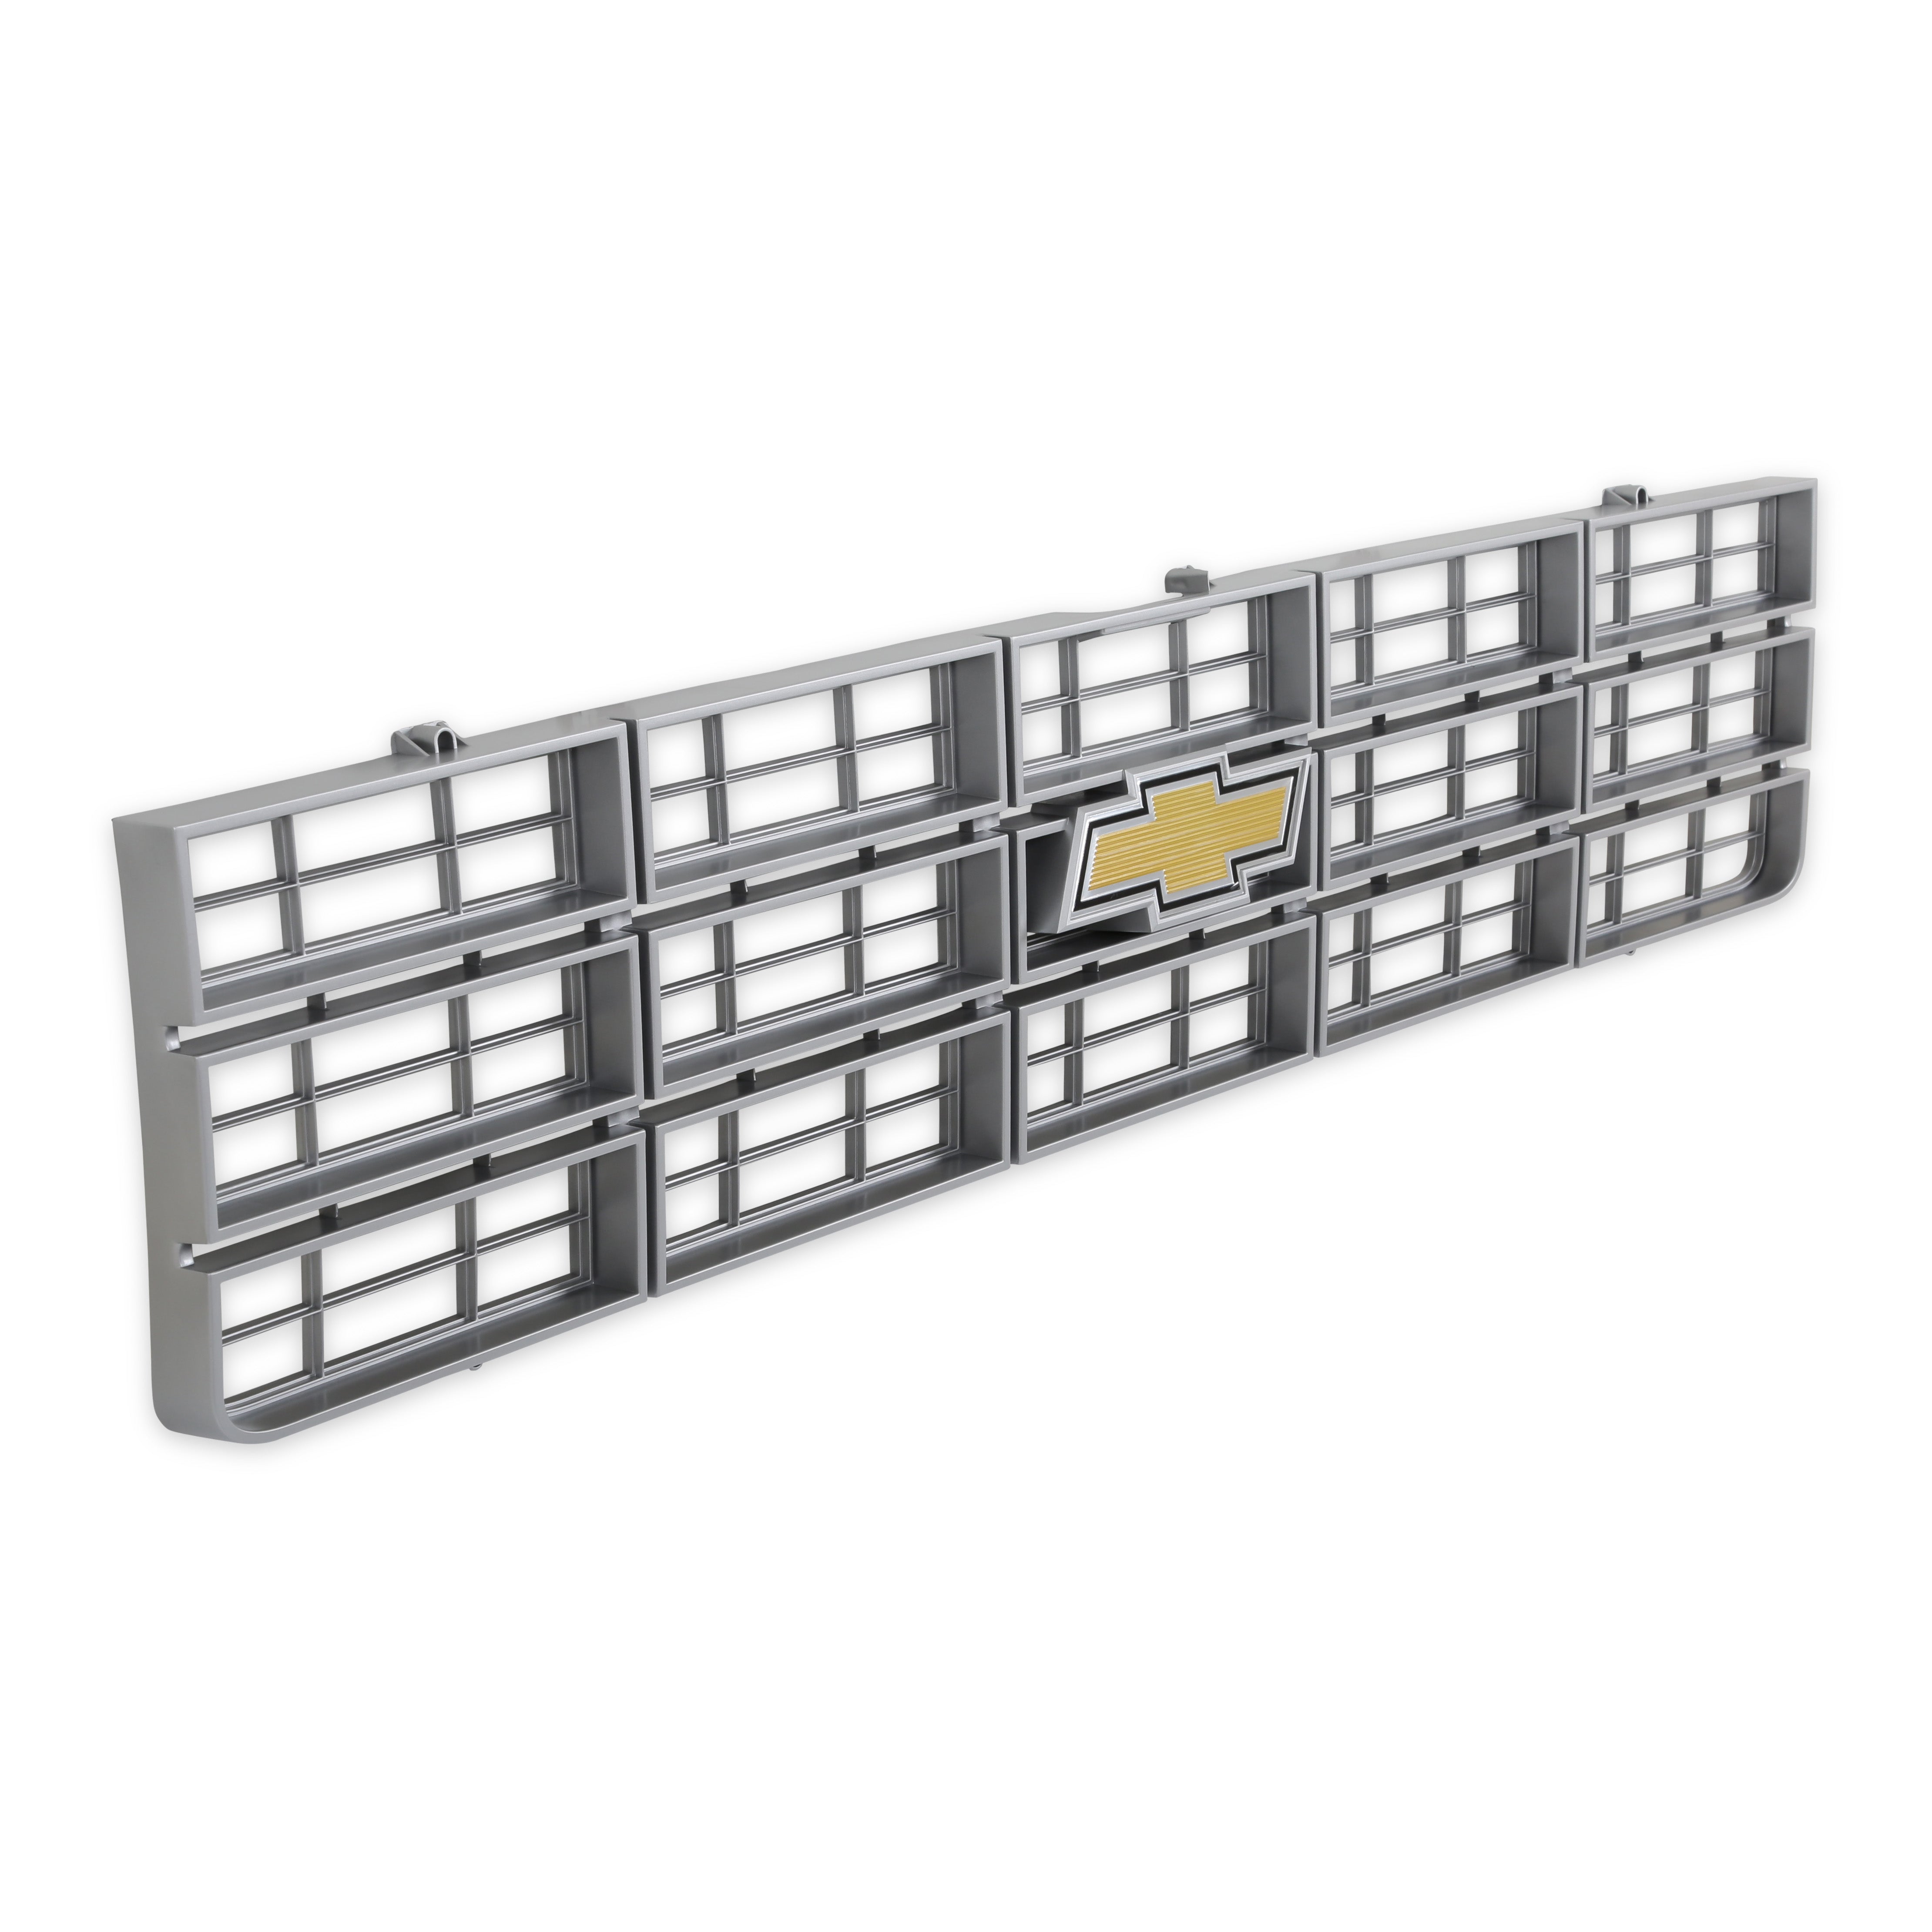 BROTHERS C/K Chevy Grille - w/ Bowtie - Argent Grey pn 04-171